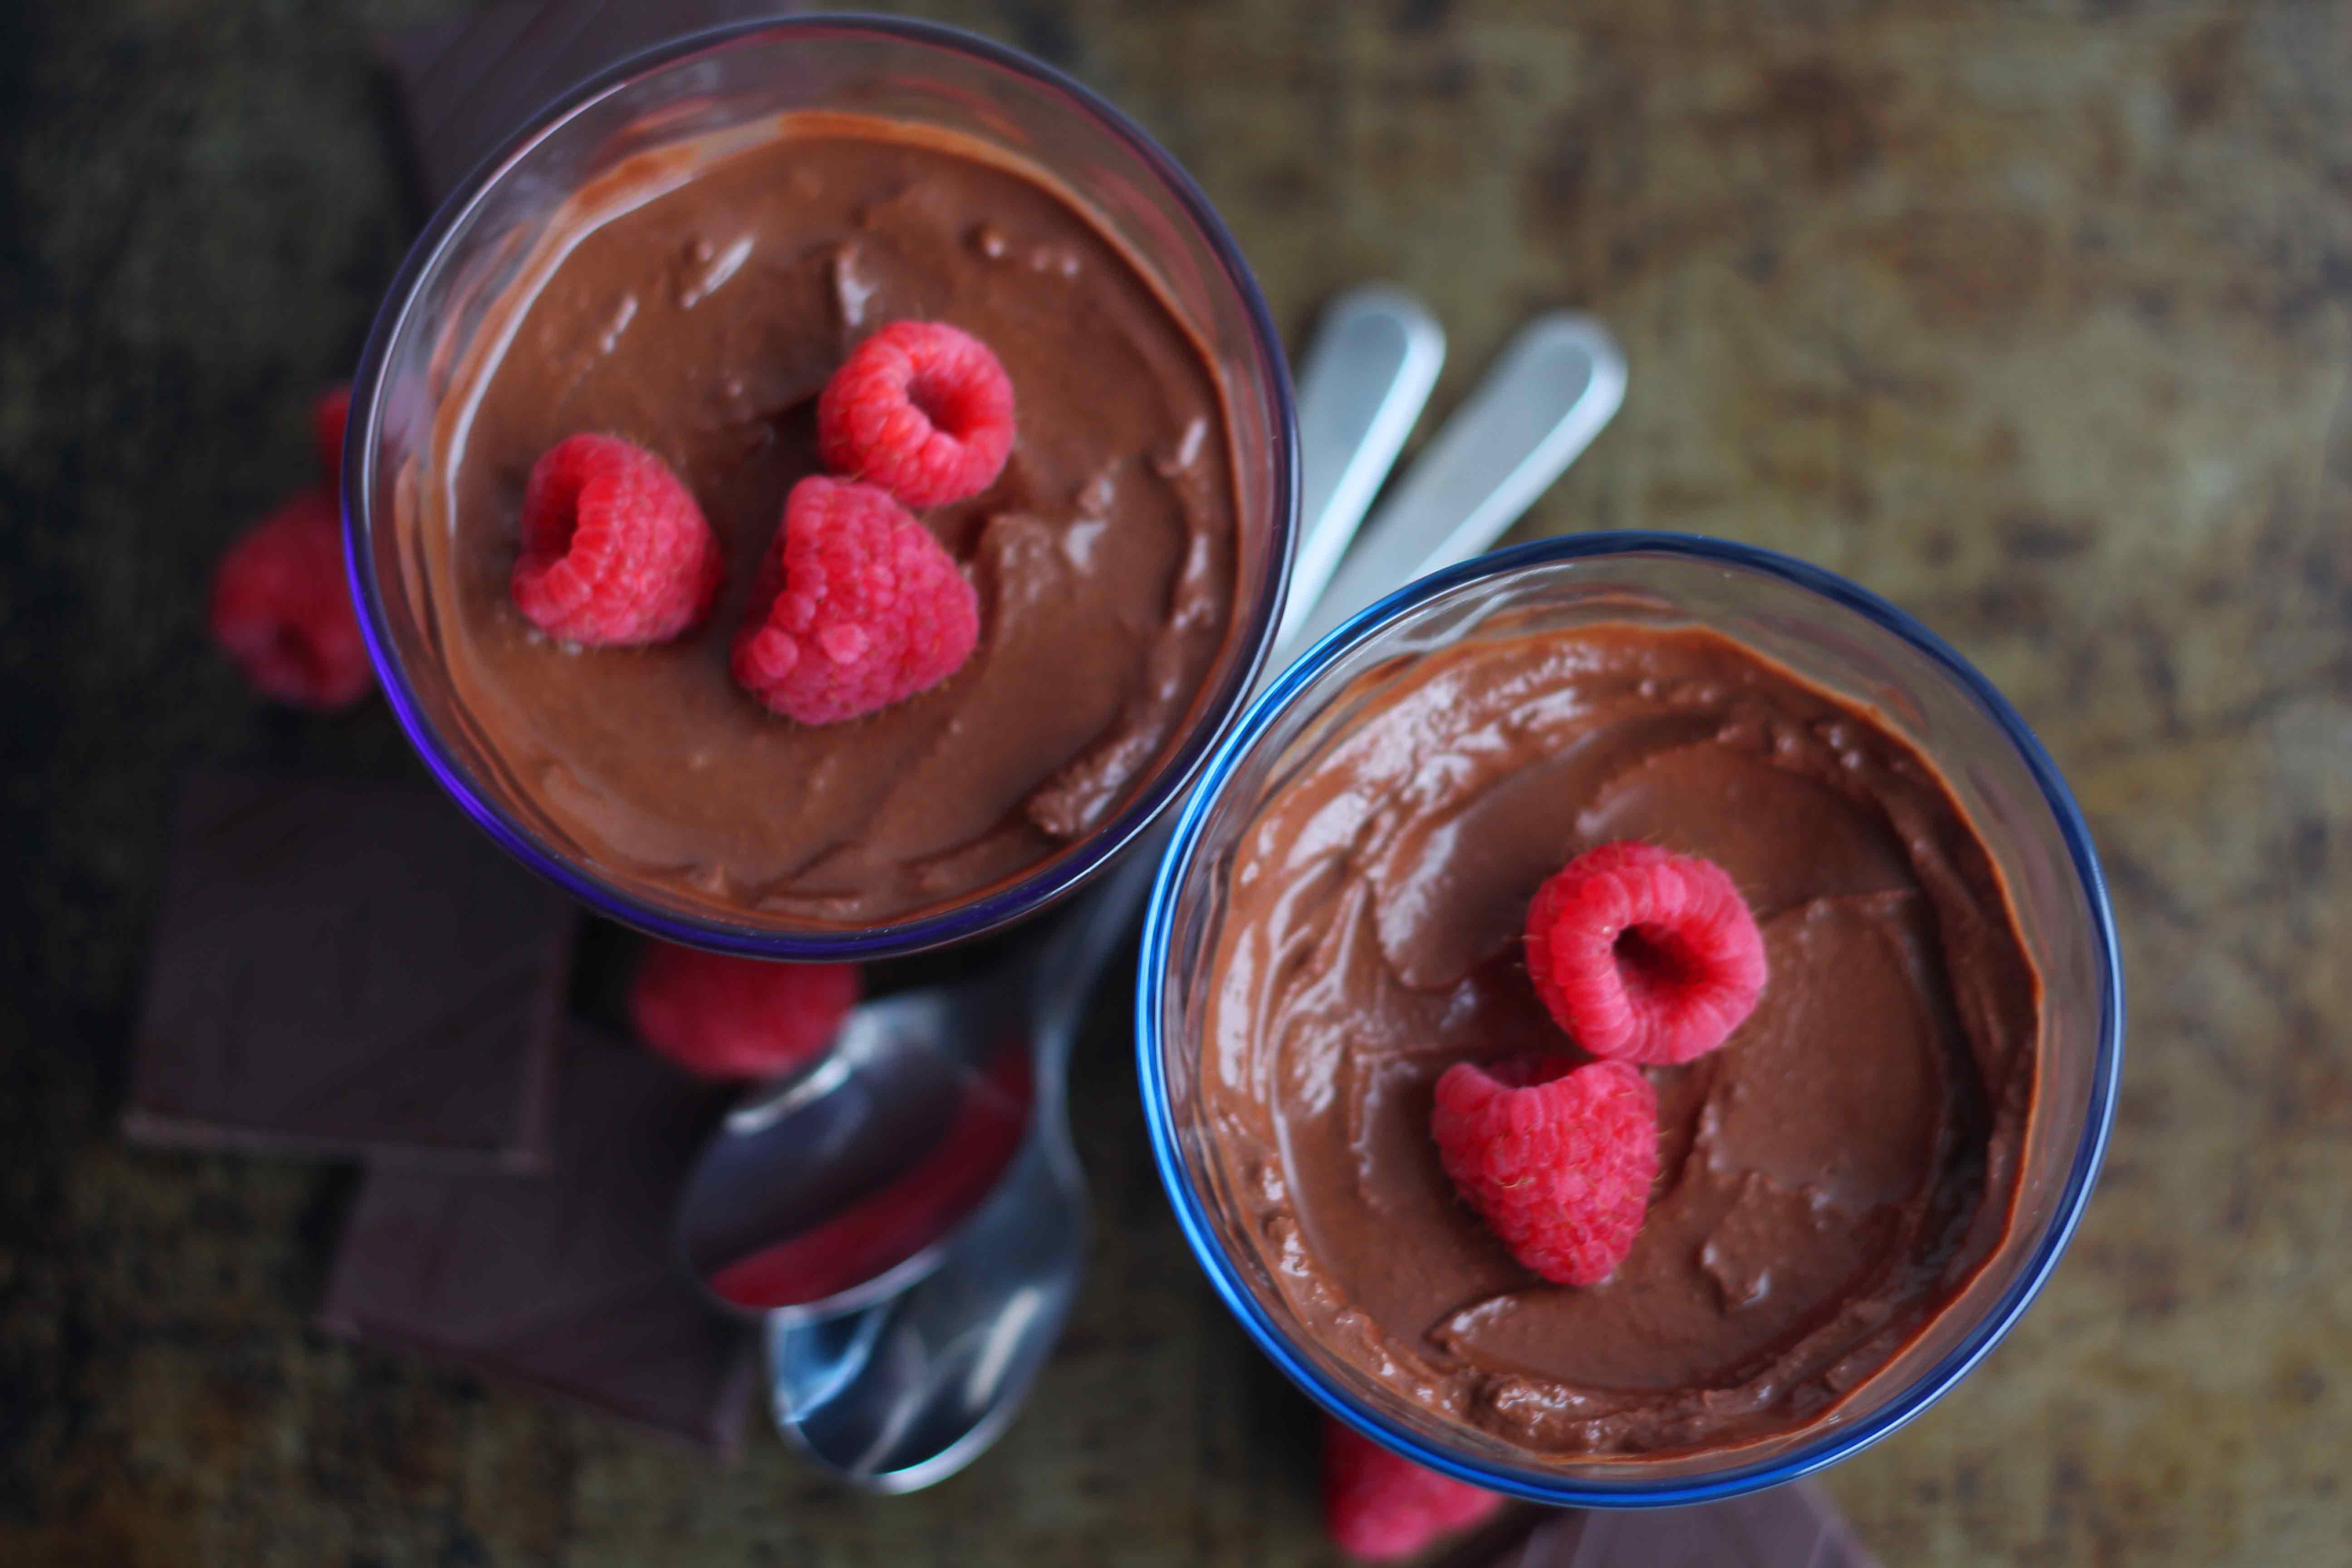 Decadent 3 Ingredient Chocolate Mousse comes together in only a few minutes and will be sure to impress. It's also dairy free, Paleo and vegan.